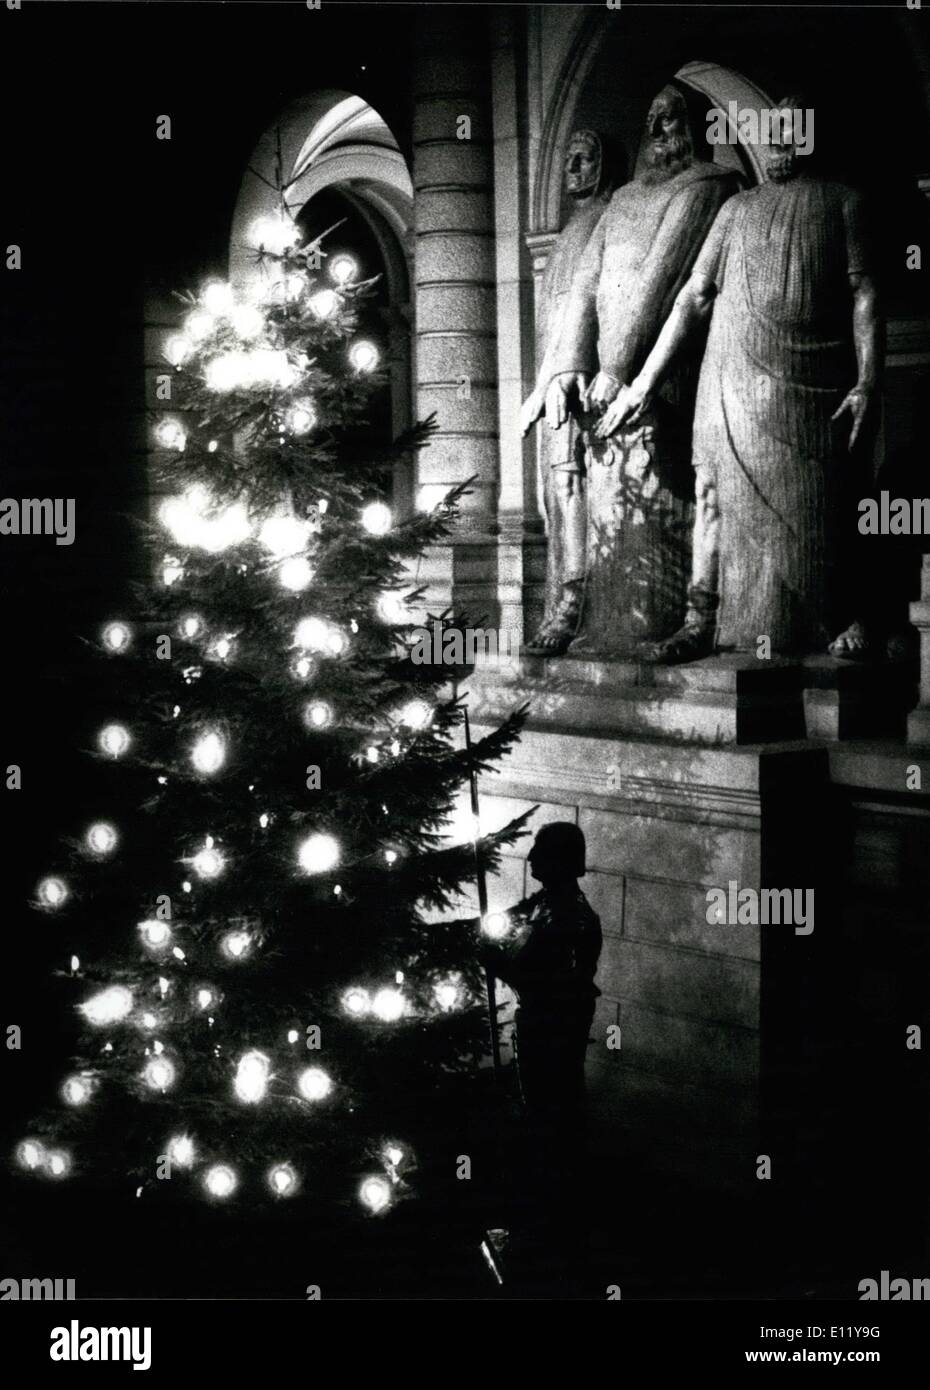 Dec. 12, 1980 - Christmas Parliament A marvellous Christmas tree dips the three Confederates sculpture in the front of Swiss parliament Building in Berne soft light. Stock Photo